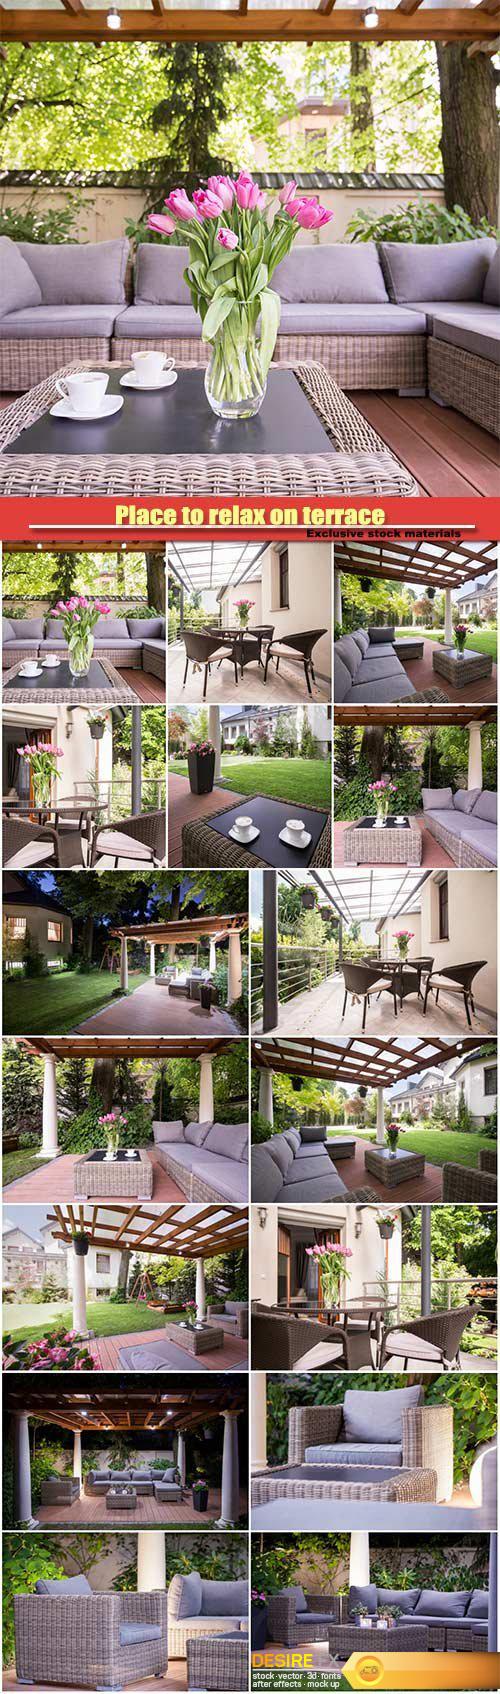 Place to relax on terrace, elegant rattan garden furnitures